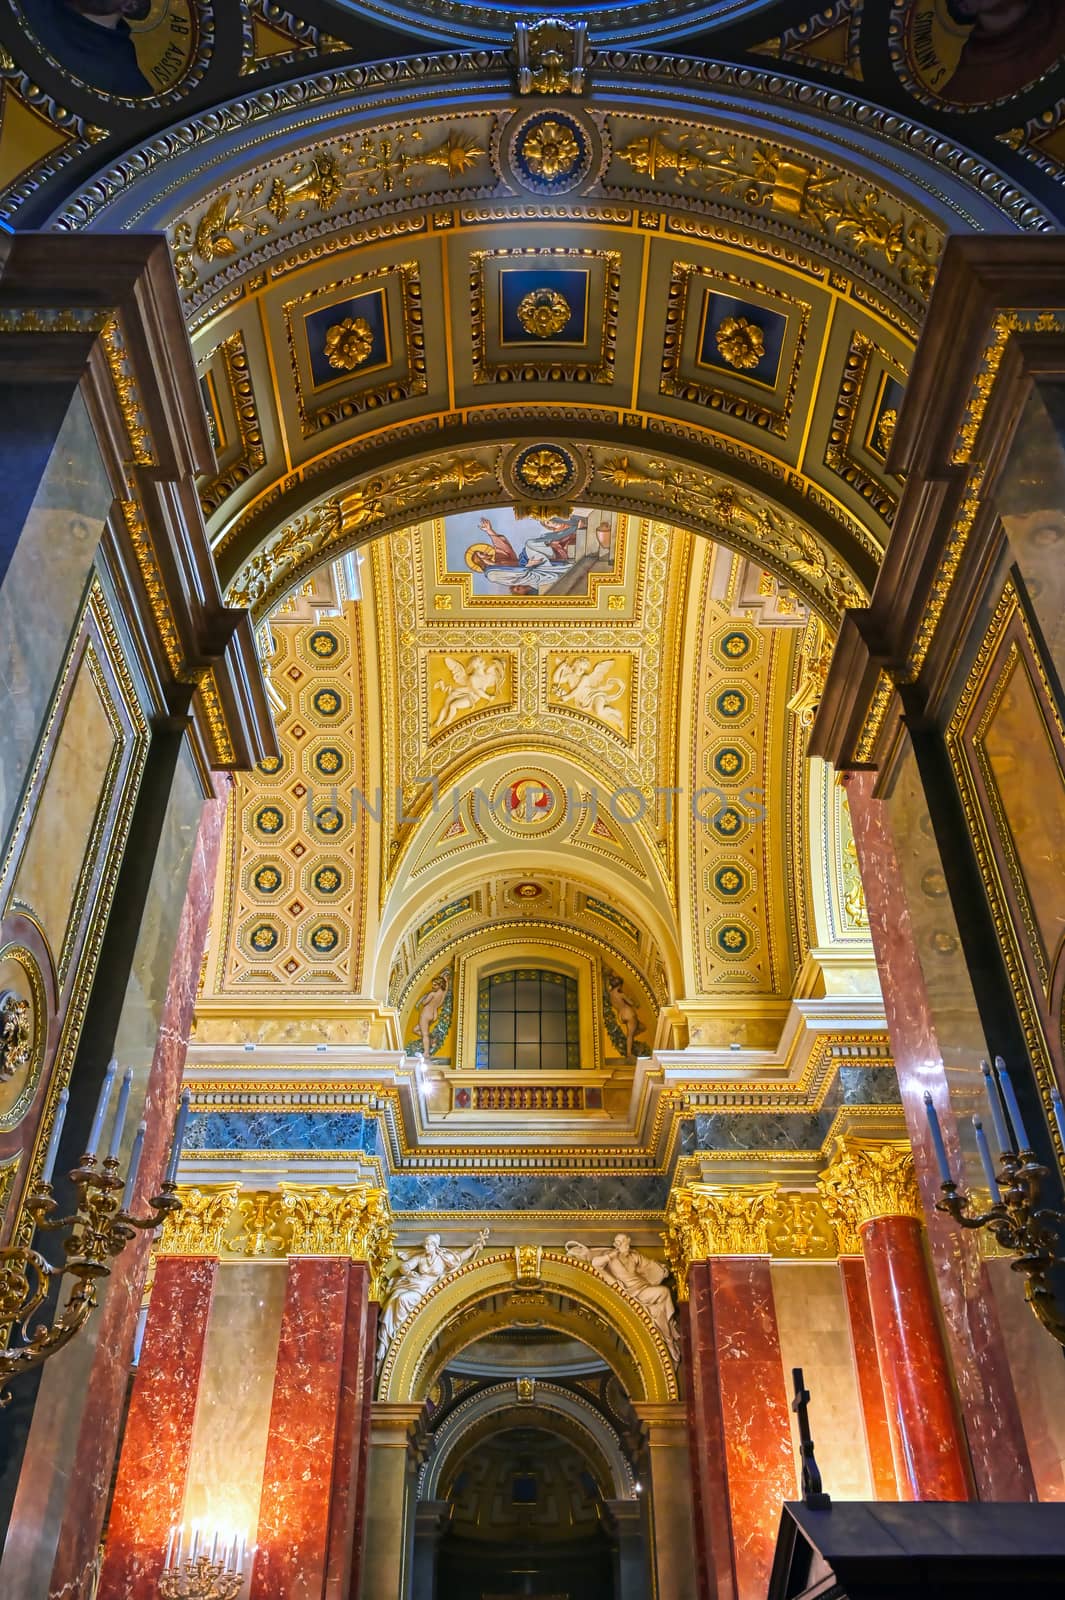 Budapest, Hungary - May 22, 2019 - The interior of St. Stephen's Basilica located on the Pest side of Budapest, Hungary.